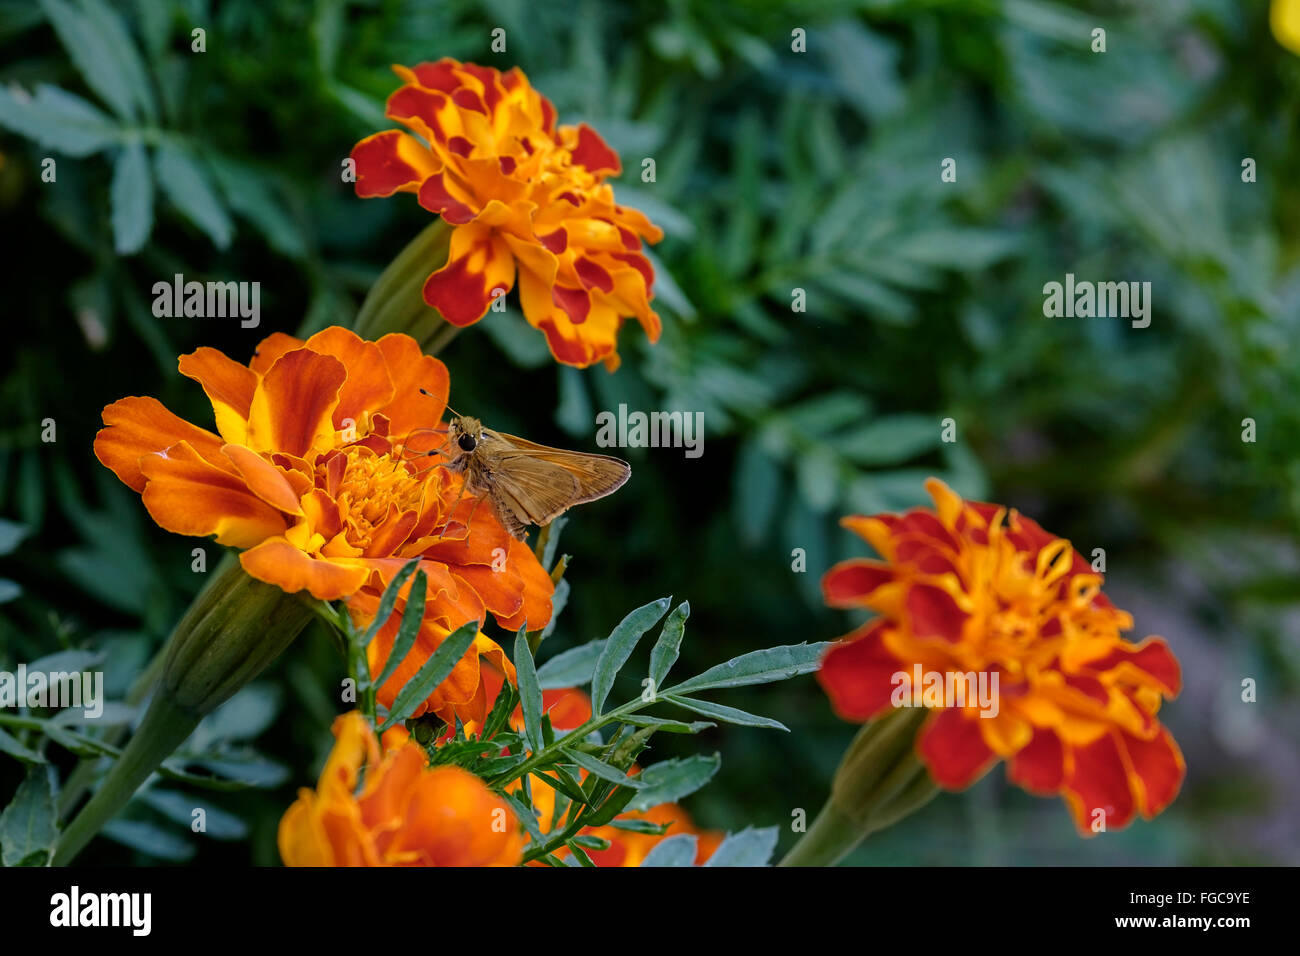 A Skipper butterfly on French Marigolds, Tagetes patula, in a flower bed in Oklahoma, USA. Often used as a spice in cuisine. Stock Photo